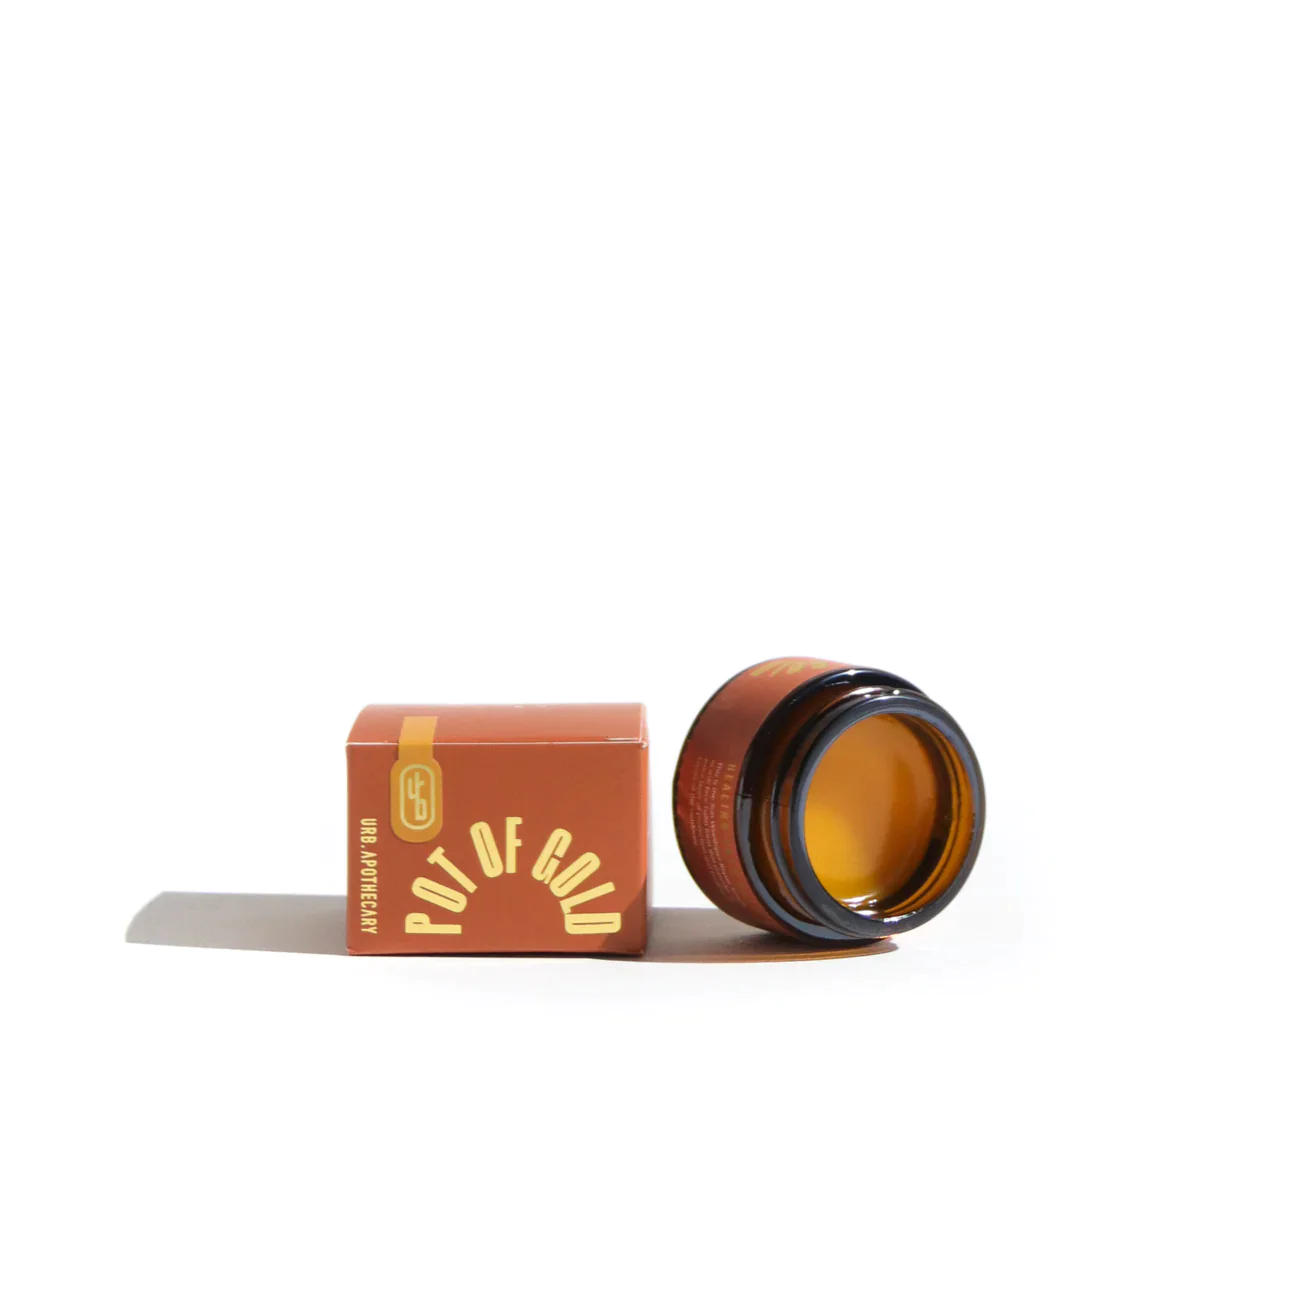 Product Image for Pot of Gold Repair Face Balm